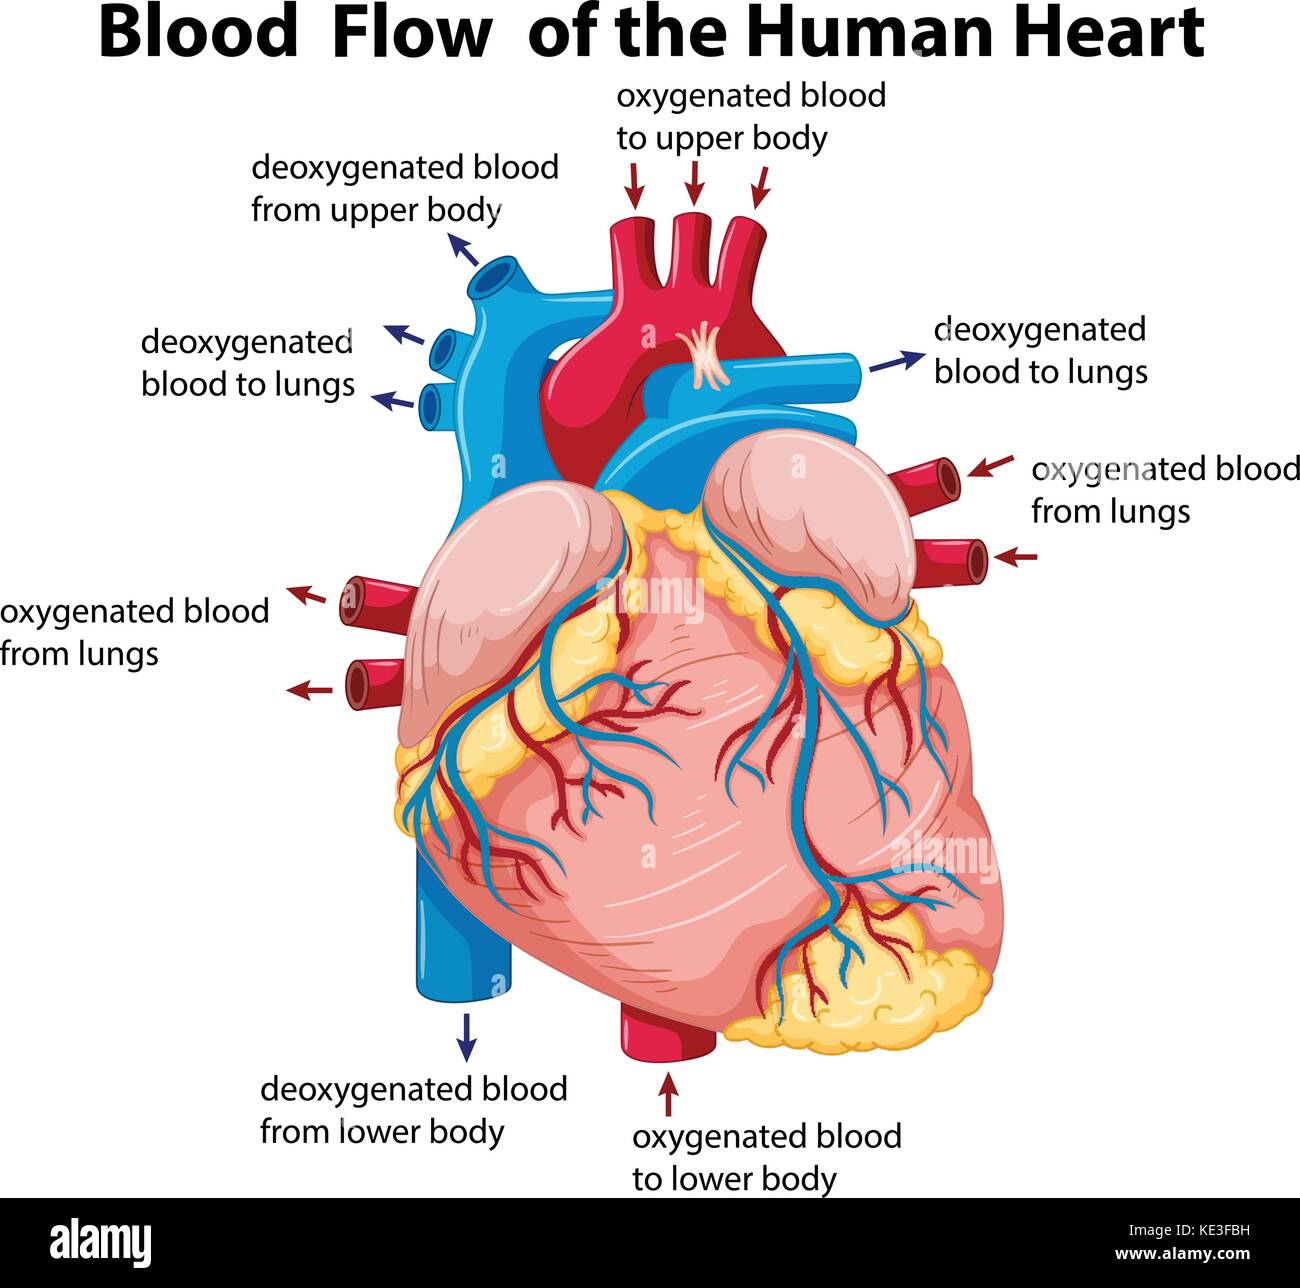 Diagram showing blood flow in human heart illustration Stock Vector